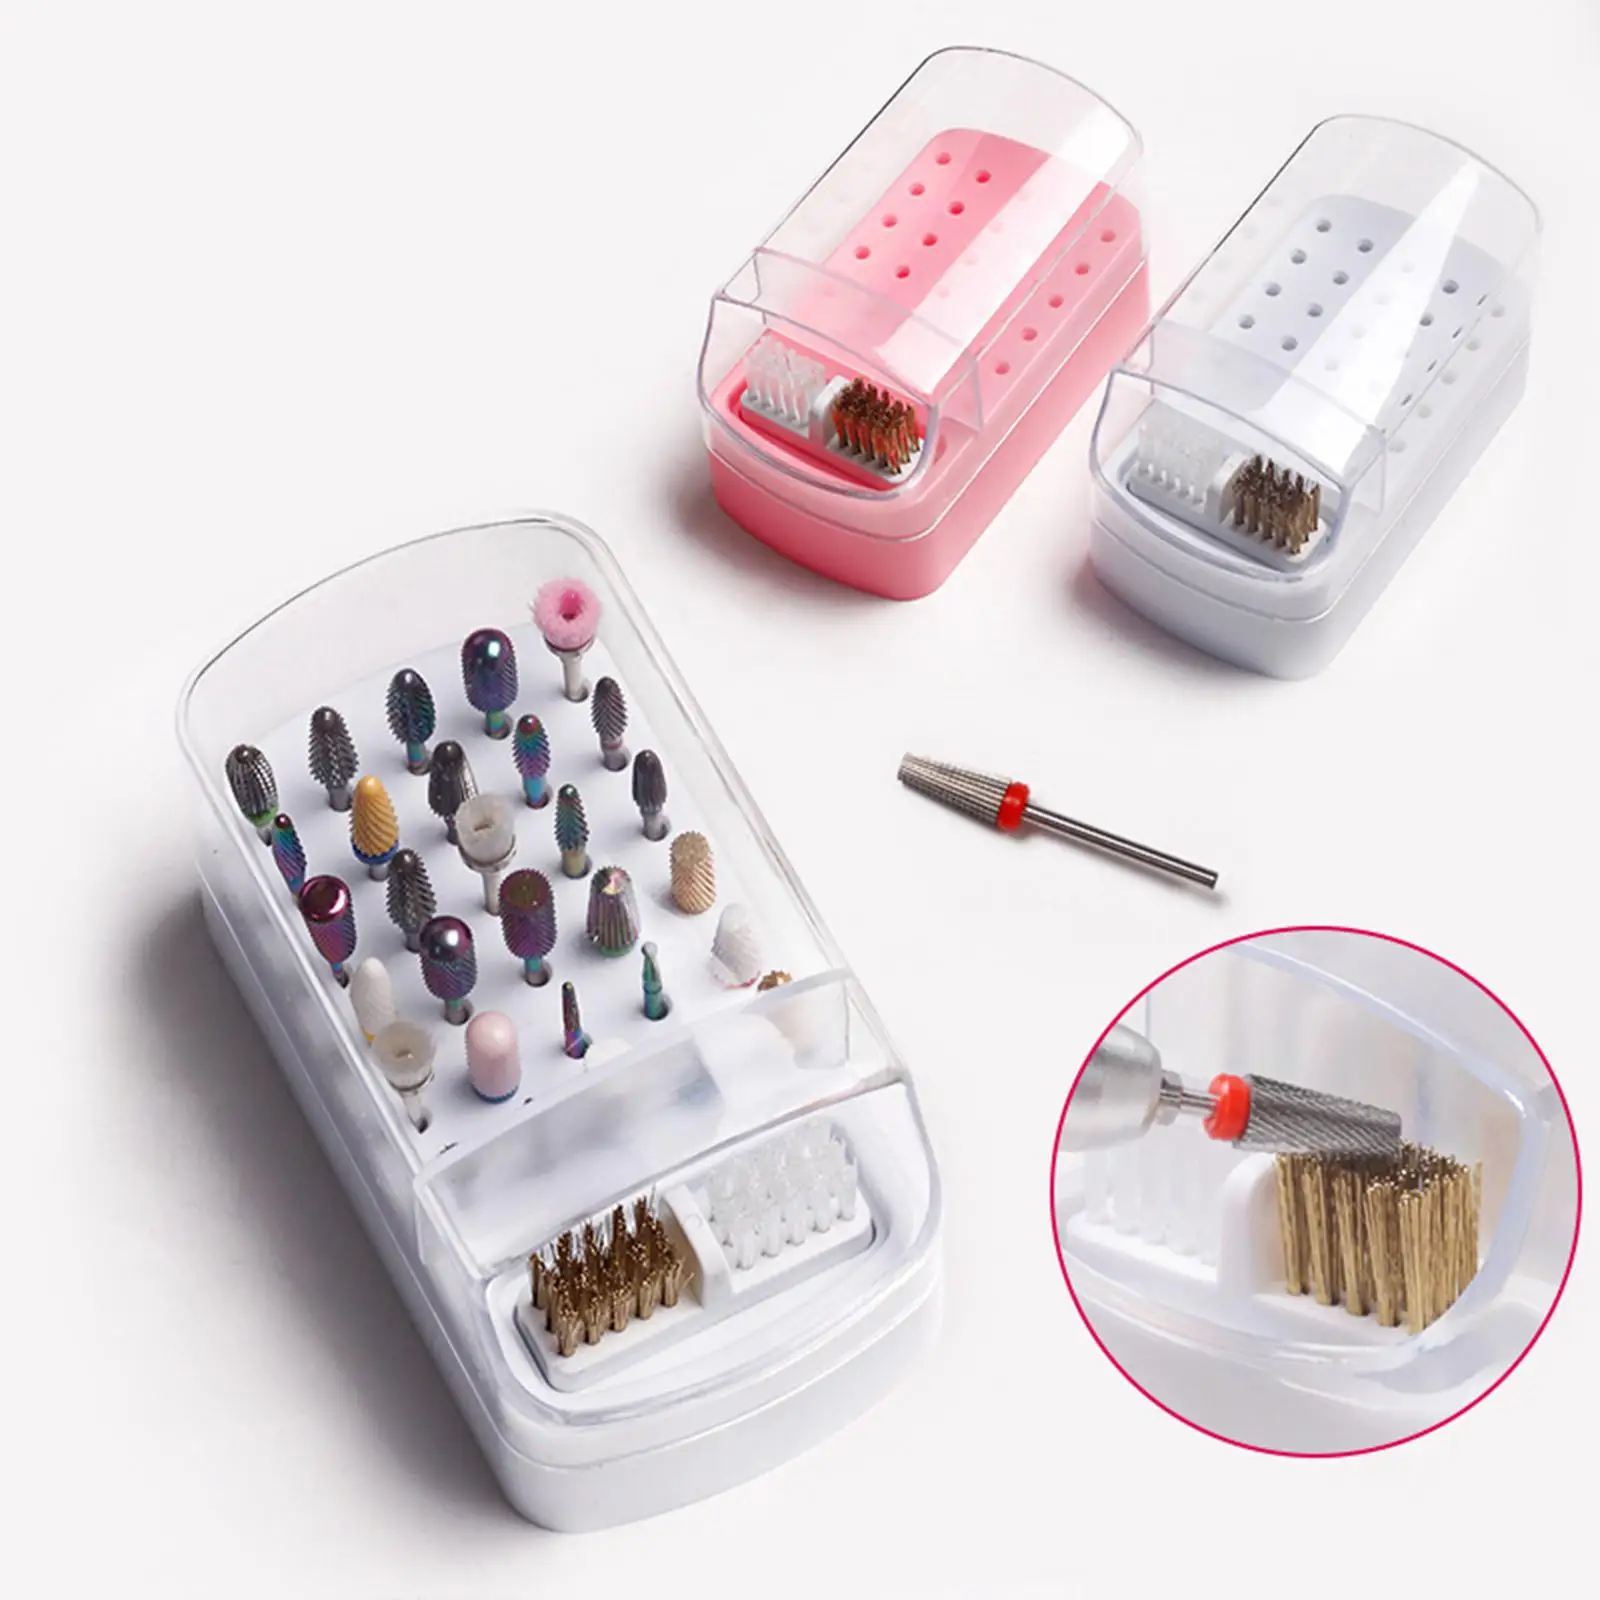 Nail Drill Bit Holder Lightweight Salon with Clear Lid Home DIY Waterproof Nail Grinding Head Polishing Bits Carrying Case